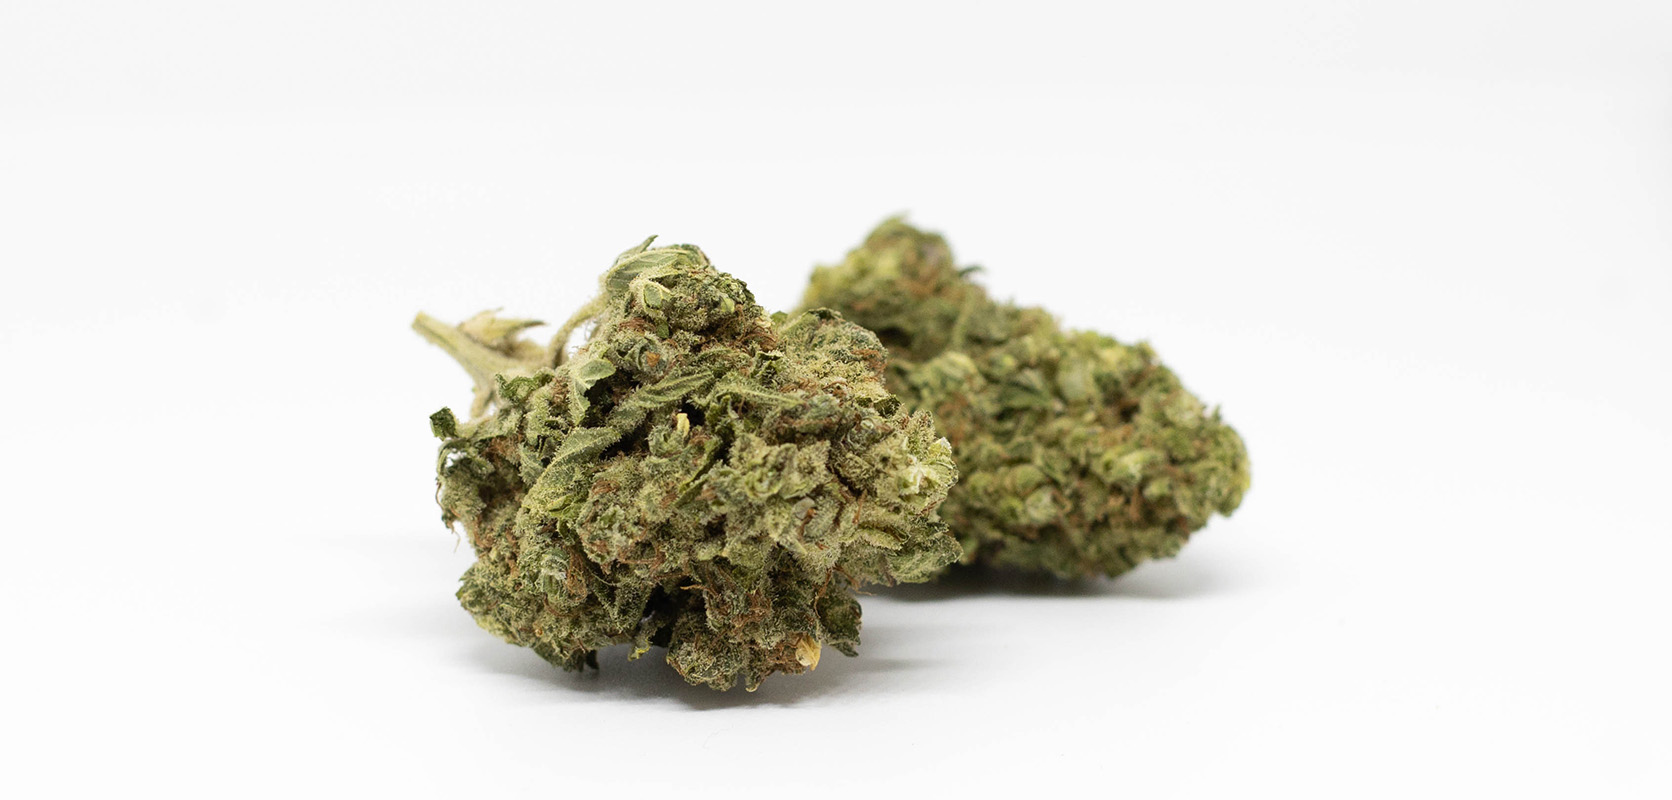 OG Kush strain value buds for sale online in Canada at wccannabis mail order marijuana online dispensary. Cheapweed dispensary. 